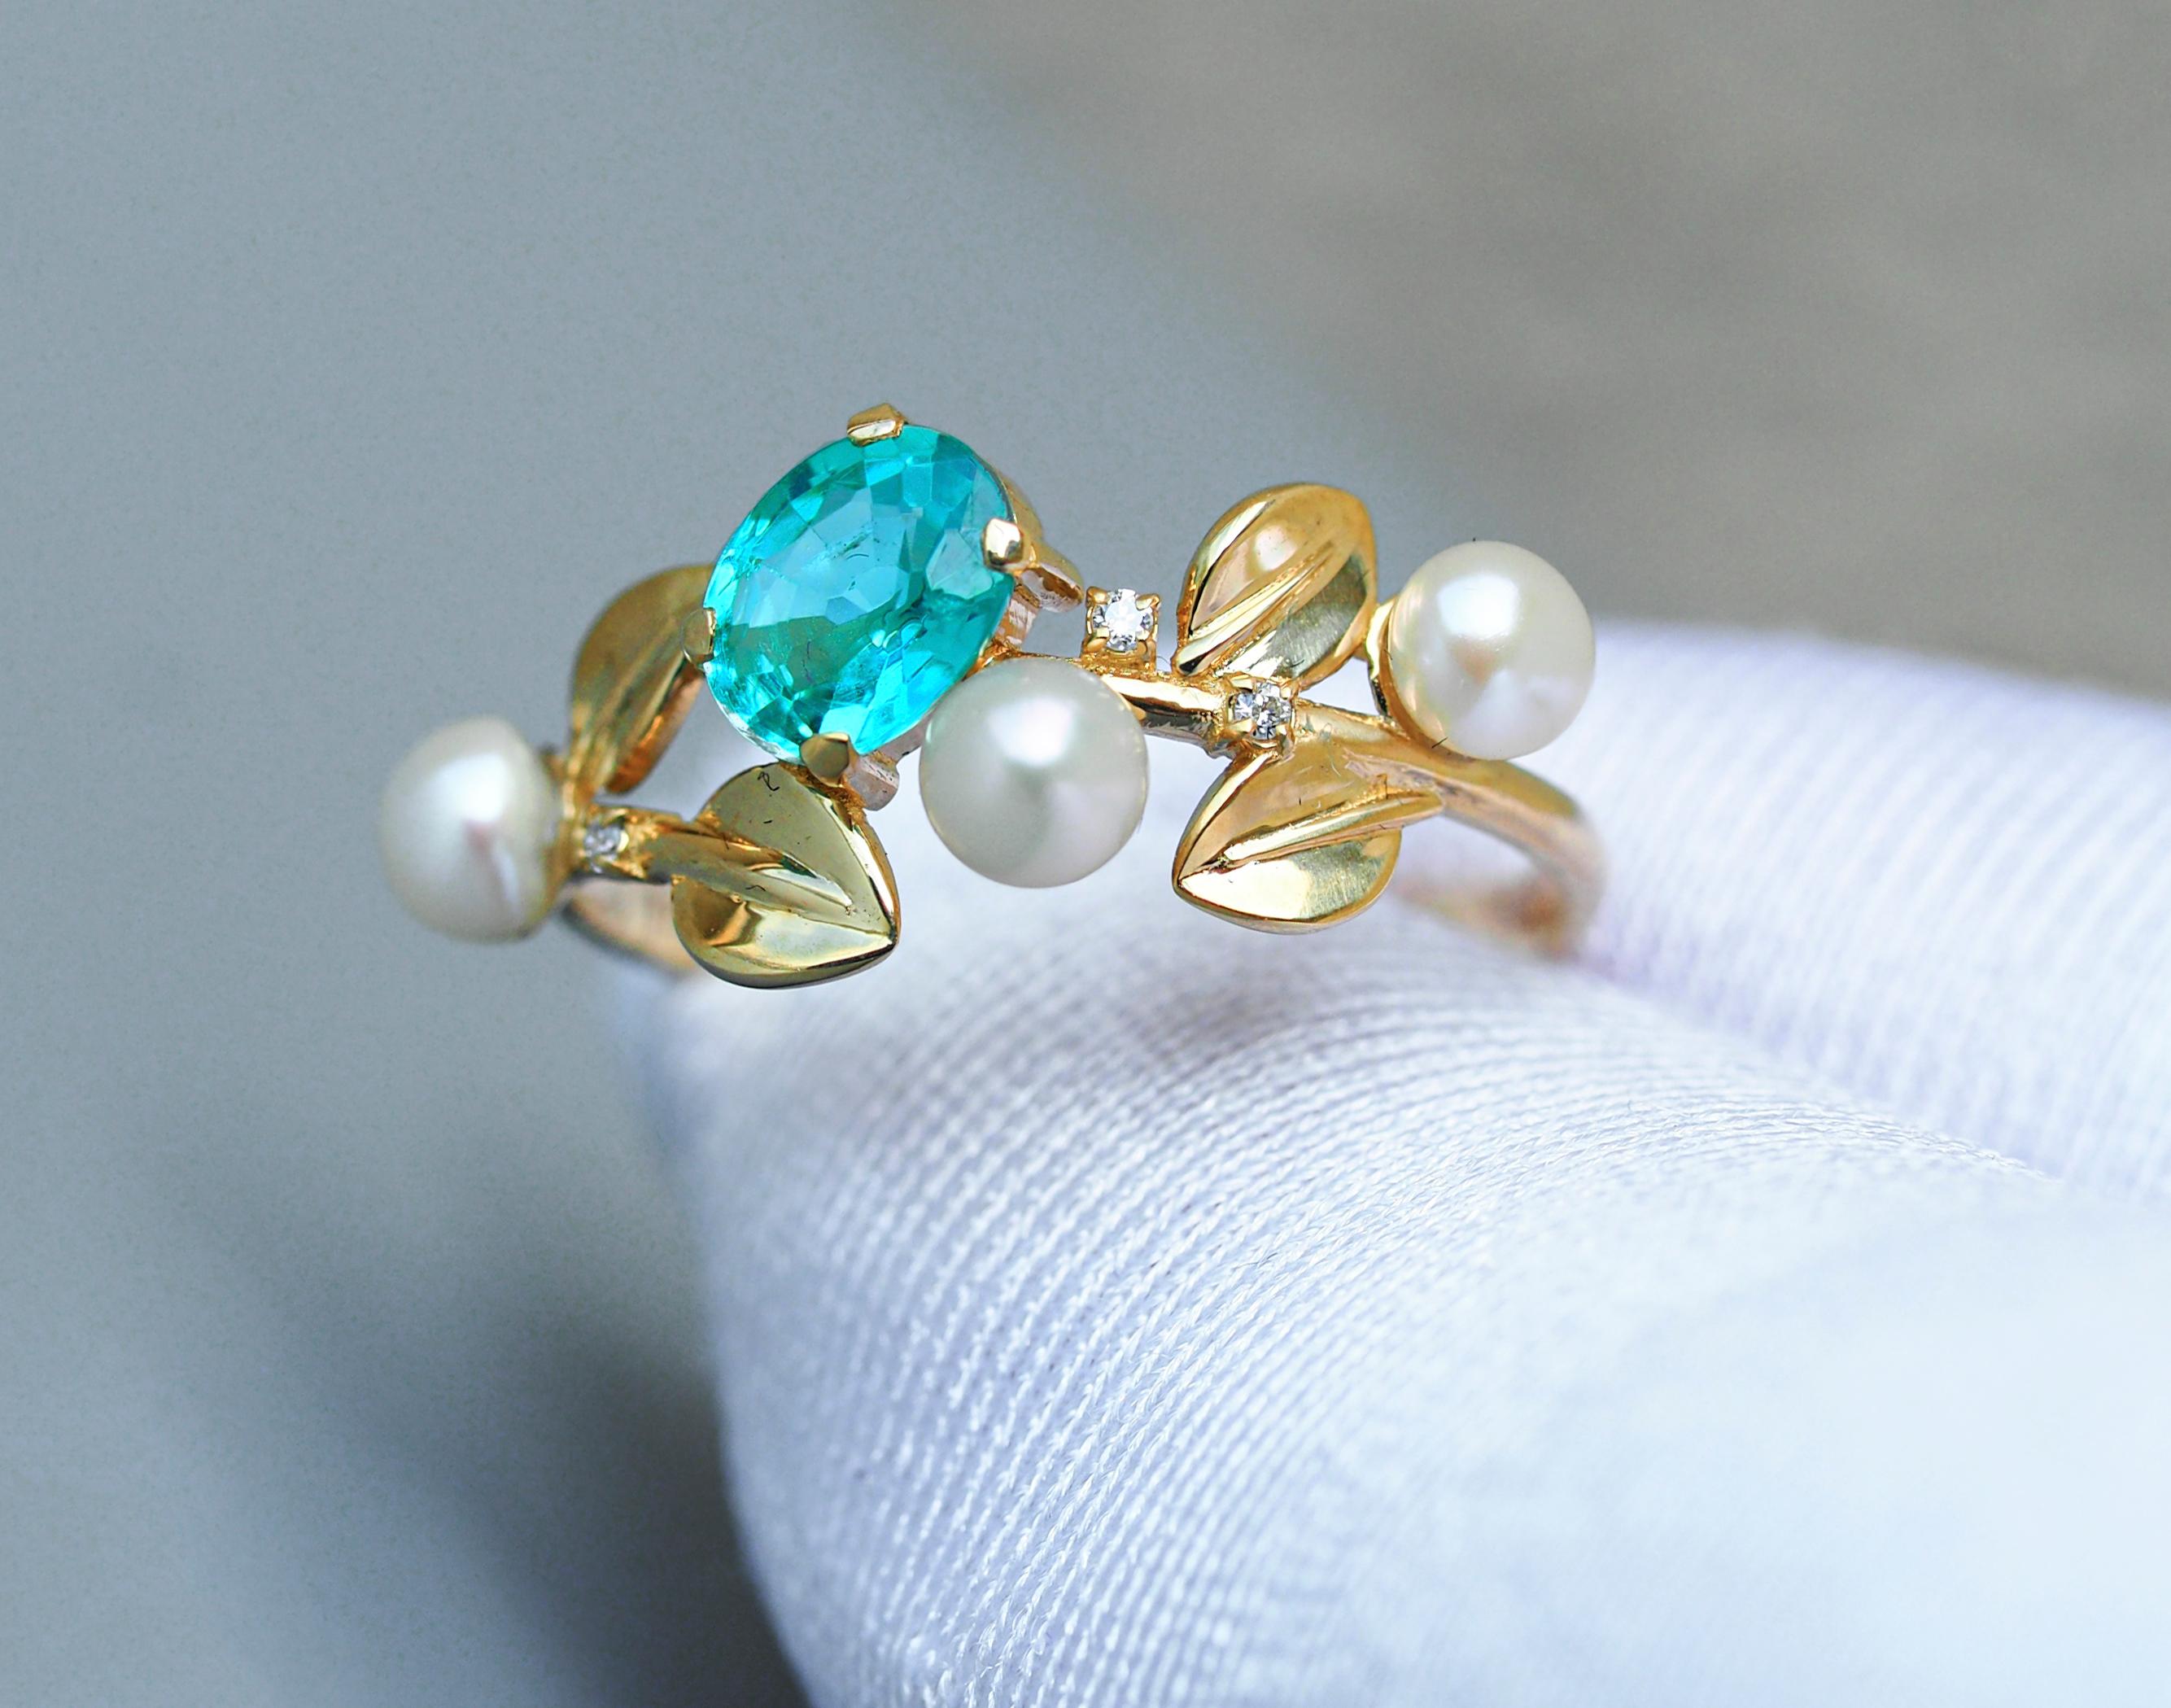 14k Gold Floral Ring with Oval Apatite, Diamonds and Pearls 3